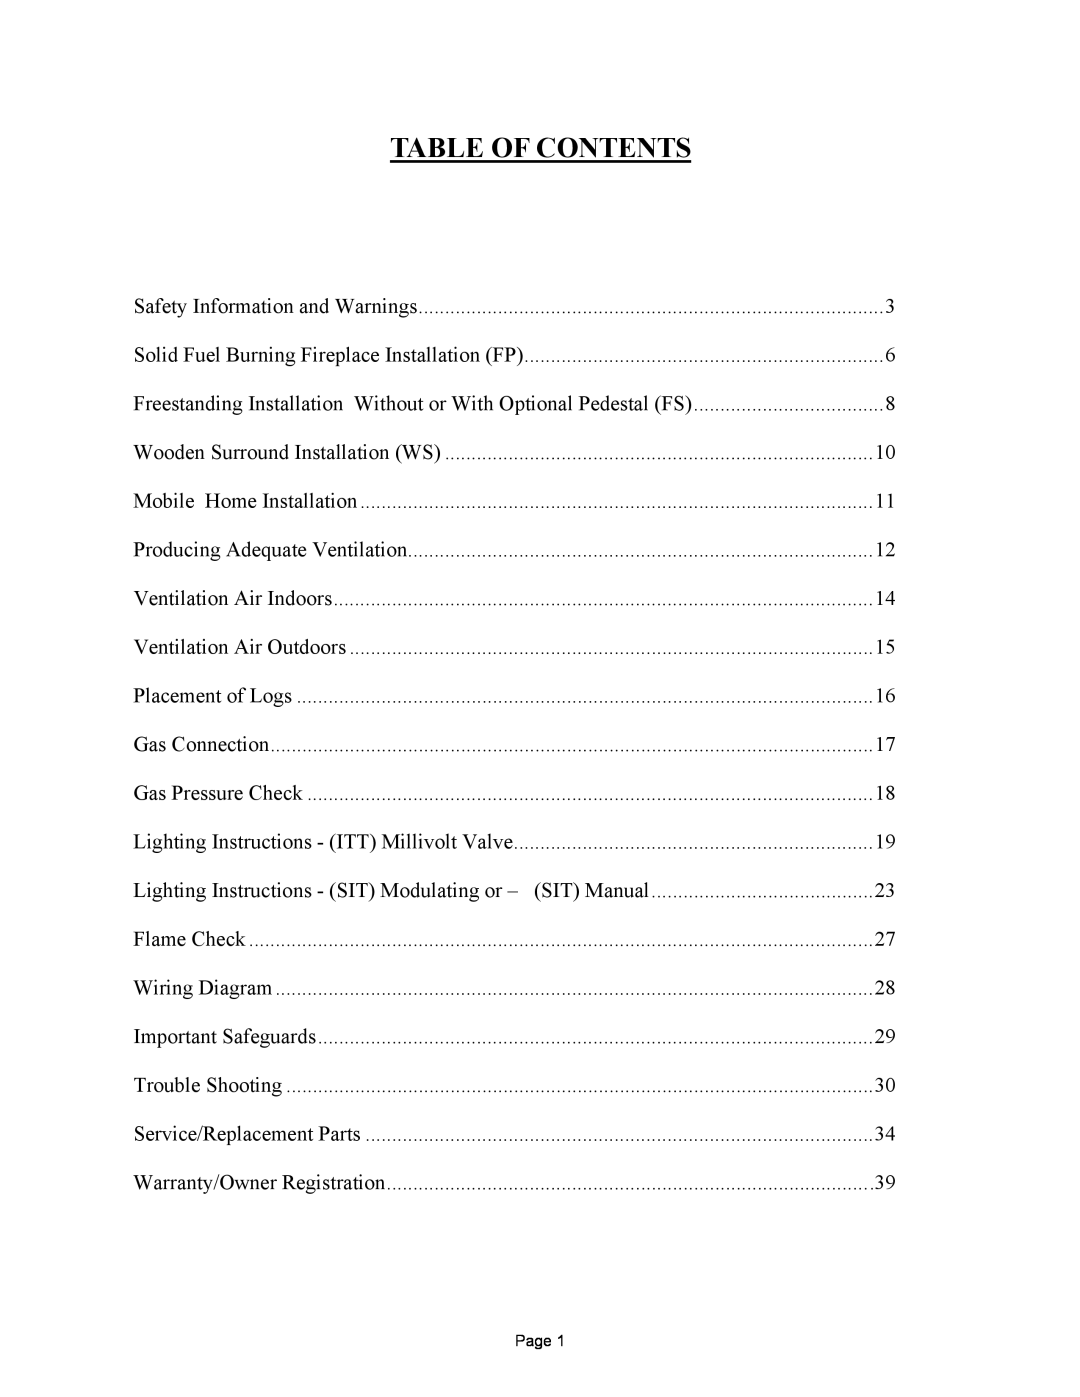 New Buck Corporation 32 manual Table Of Contents 